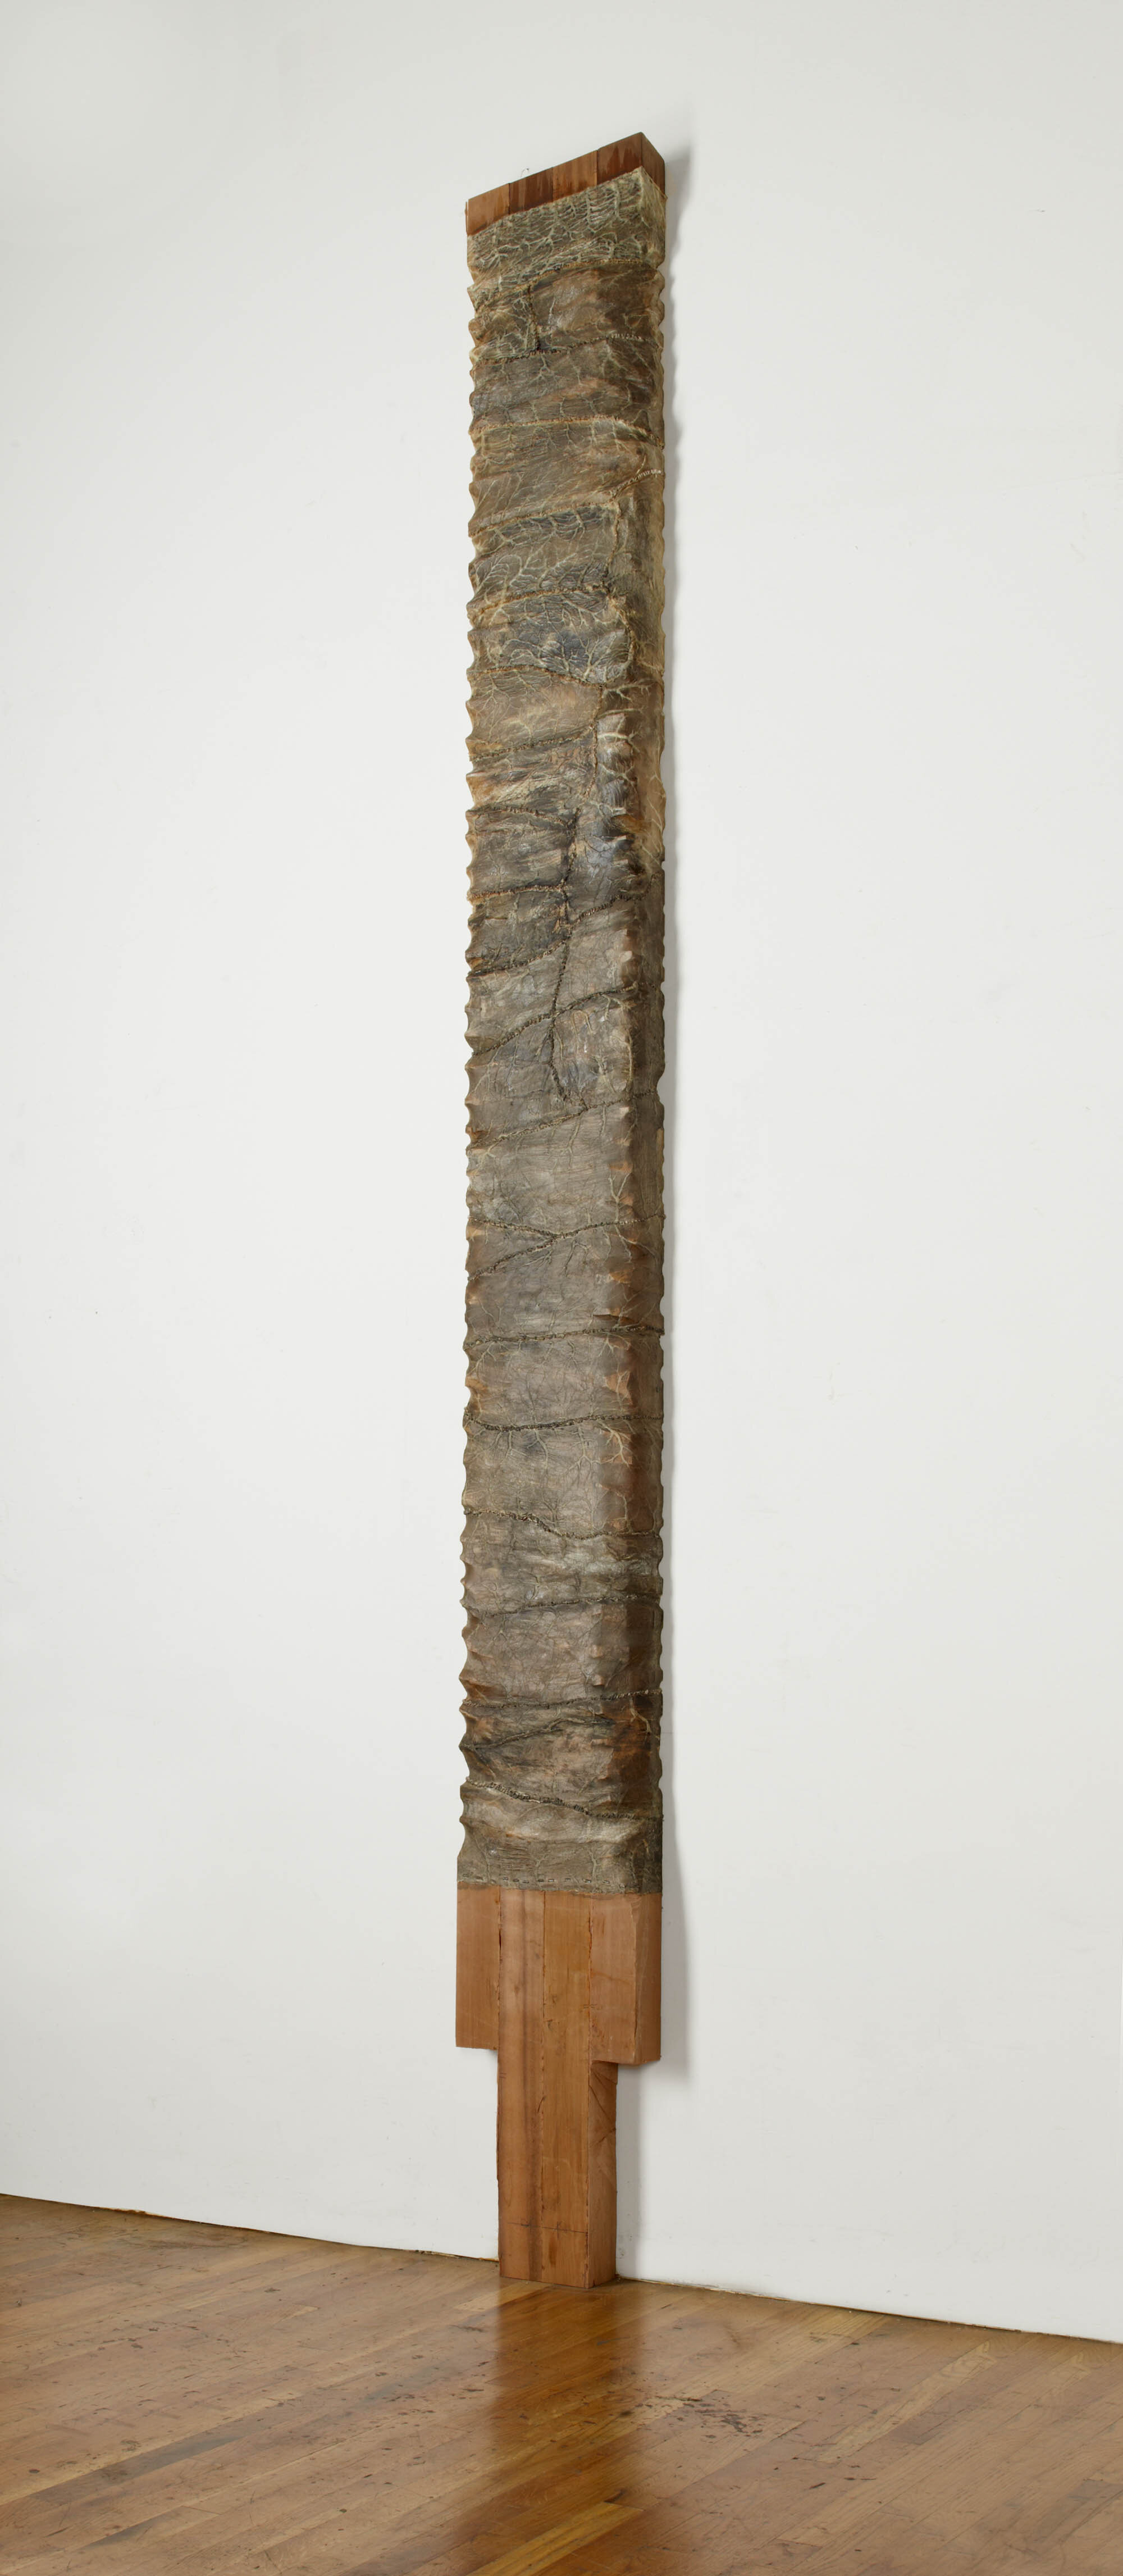       Maglownica III,  2012-13 Cedar, graphite, and cow intestines 150 x 14 x 4 in.    MORE IMAGES   Galerie Lelong &amp; Co.  